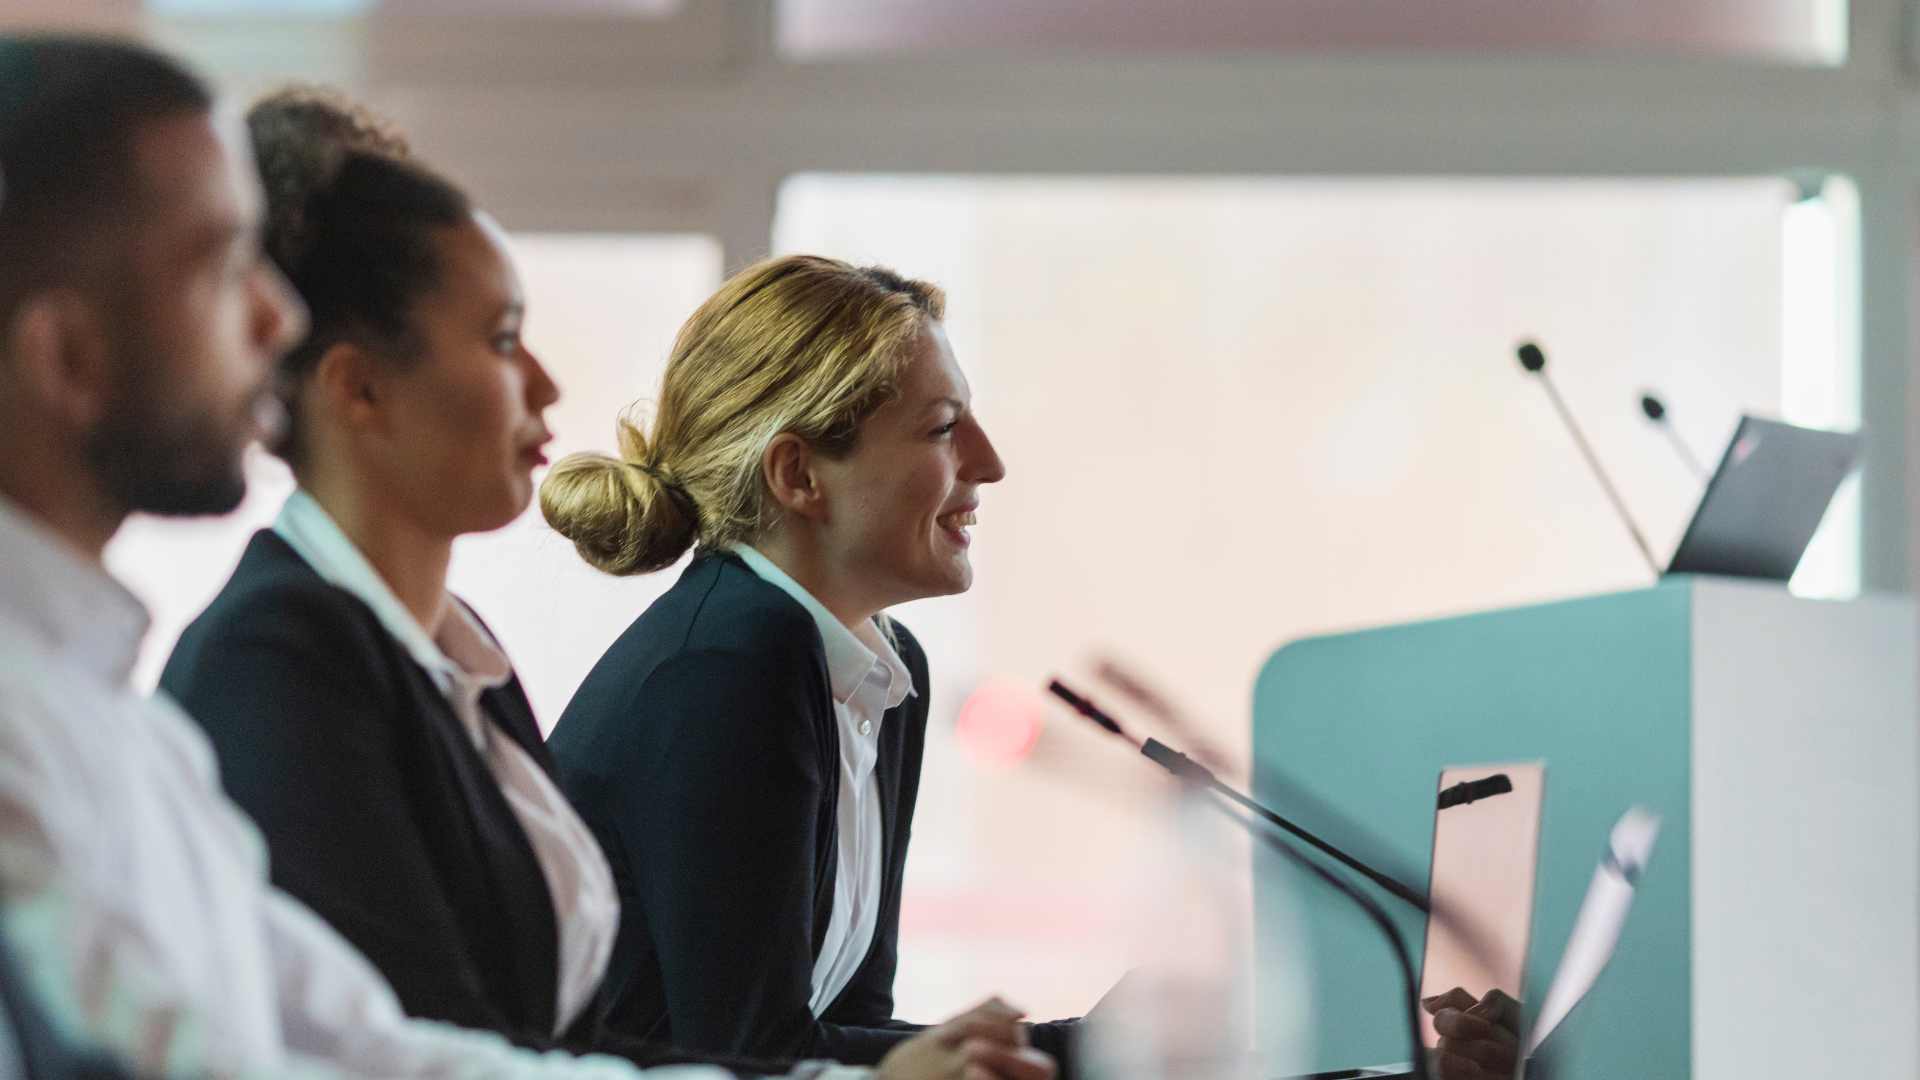 Photo of two women in navy blazers leaning forward to speak into microphones in a small conference room setting